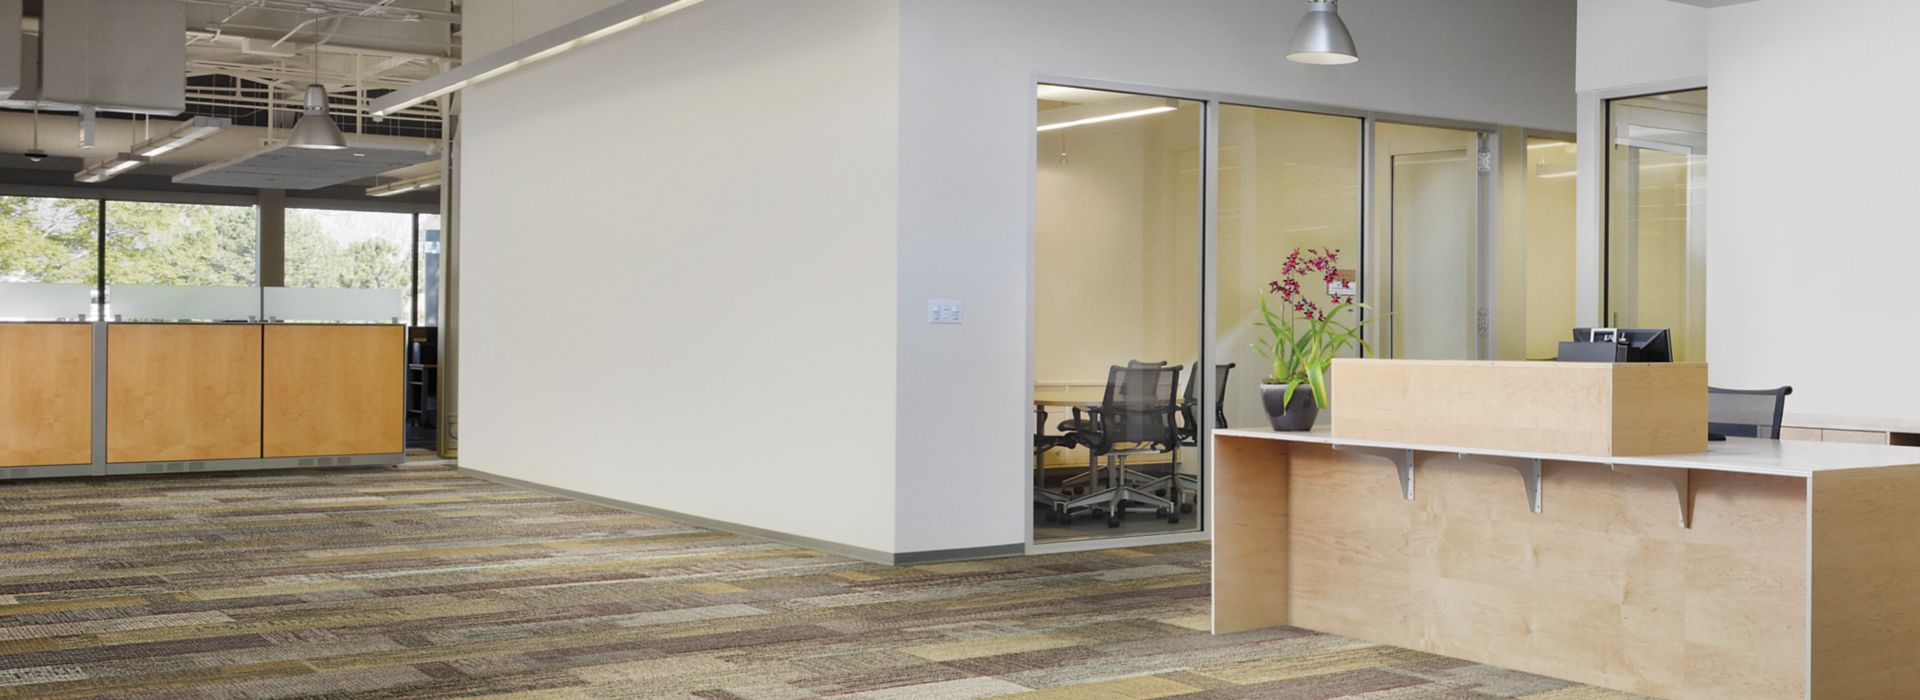 Interface Verticals plank carpet tile in open office setting with reception desk